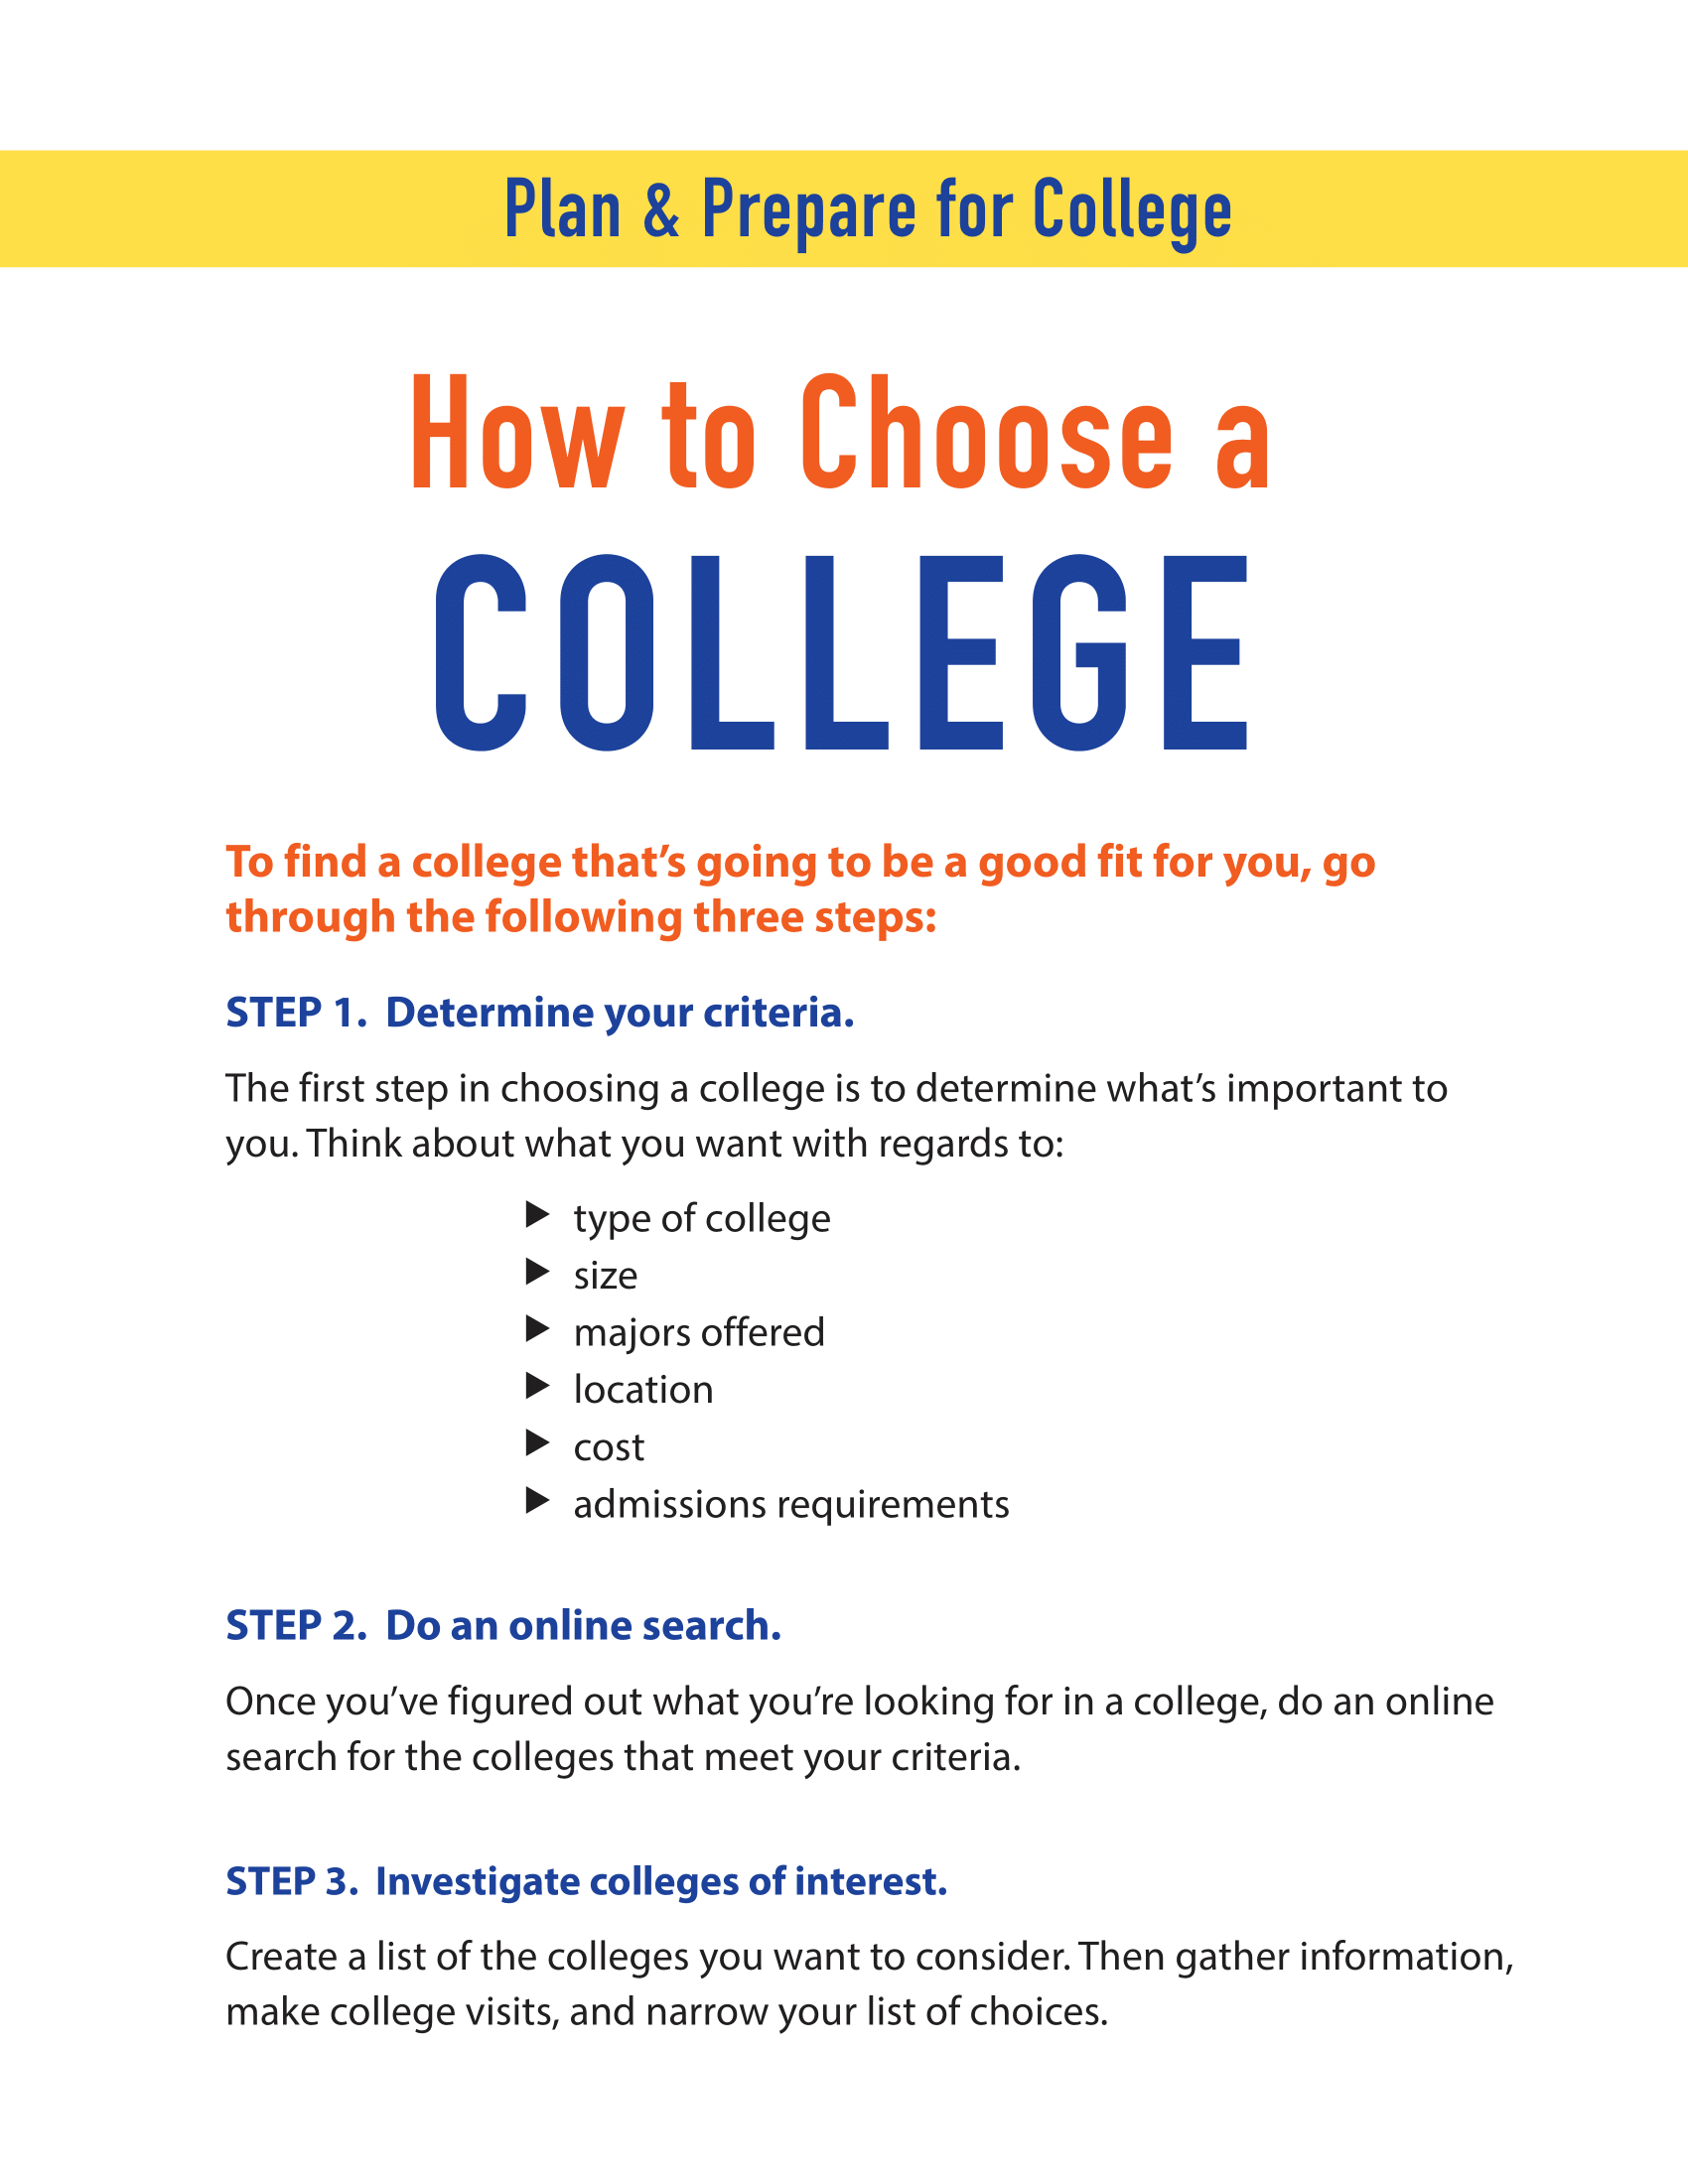 Plan and Prepare for College - How to Choose a College